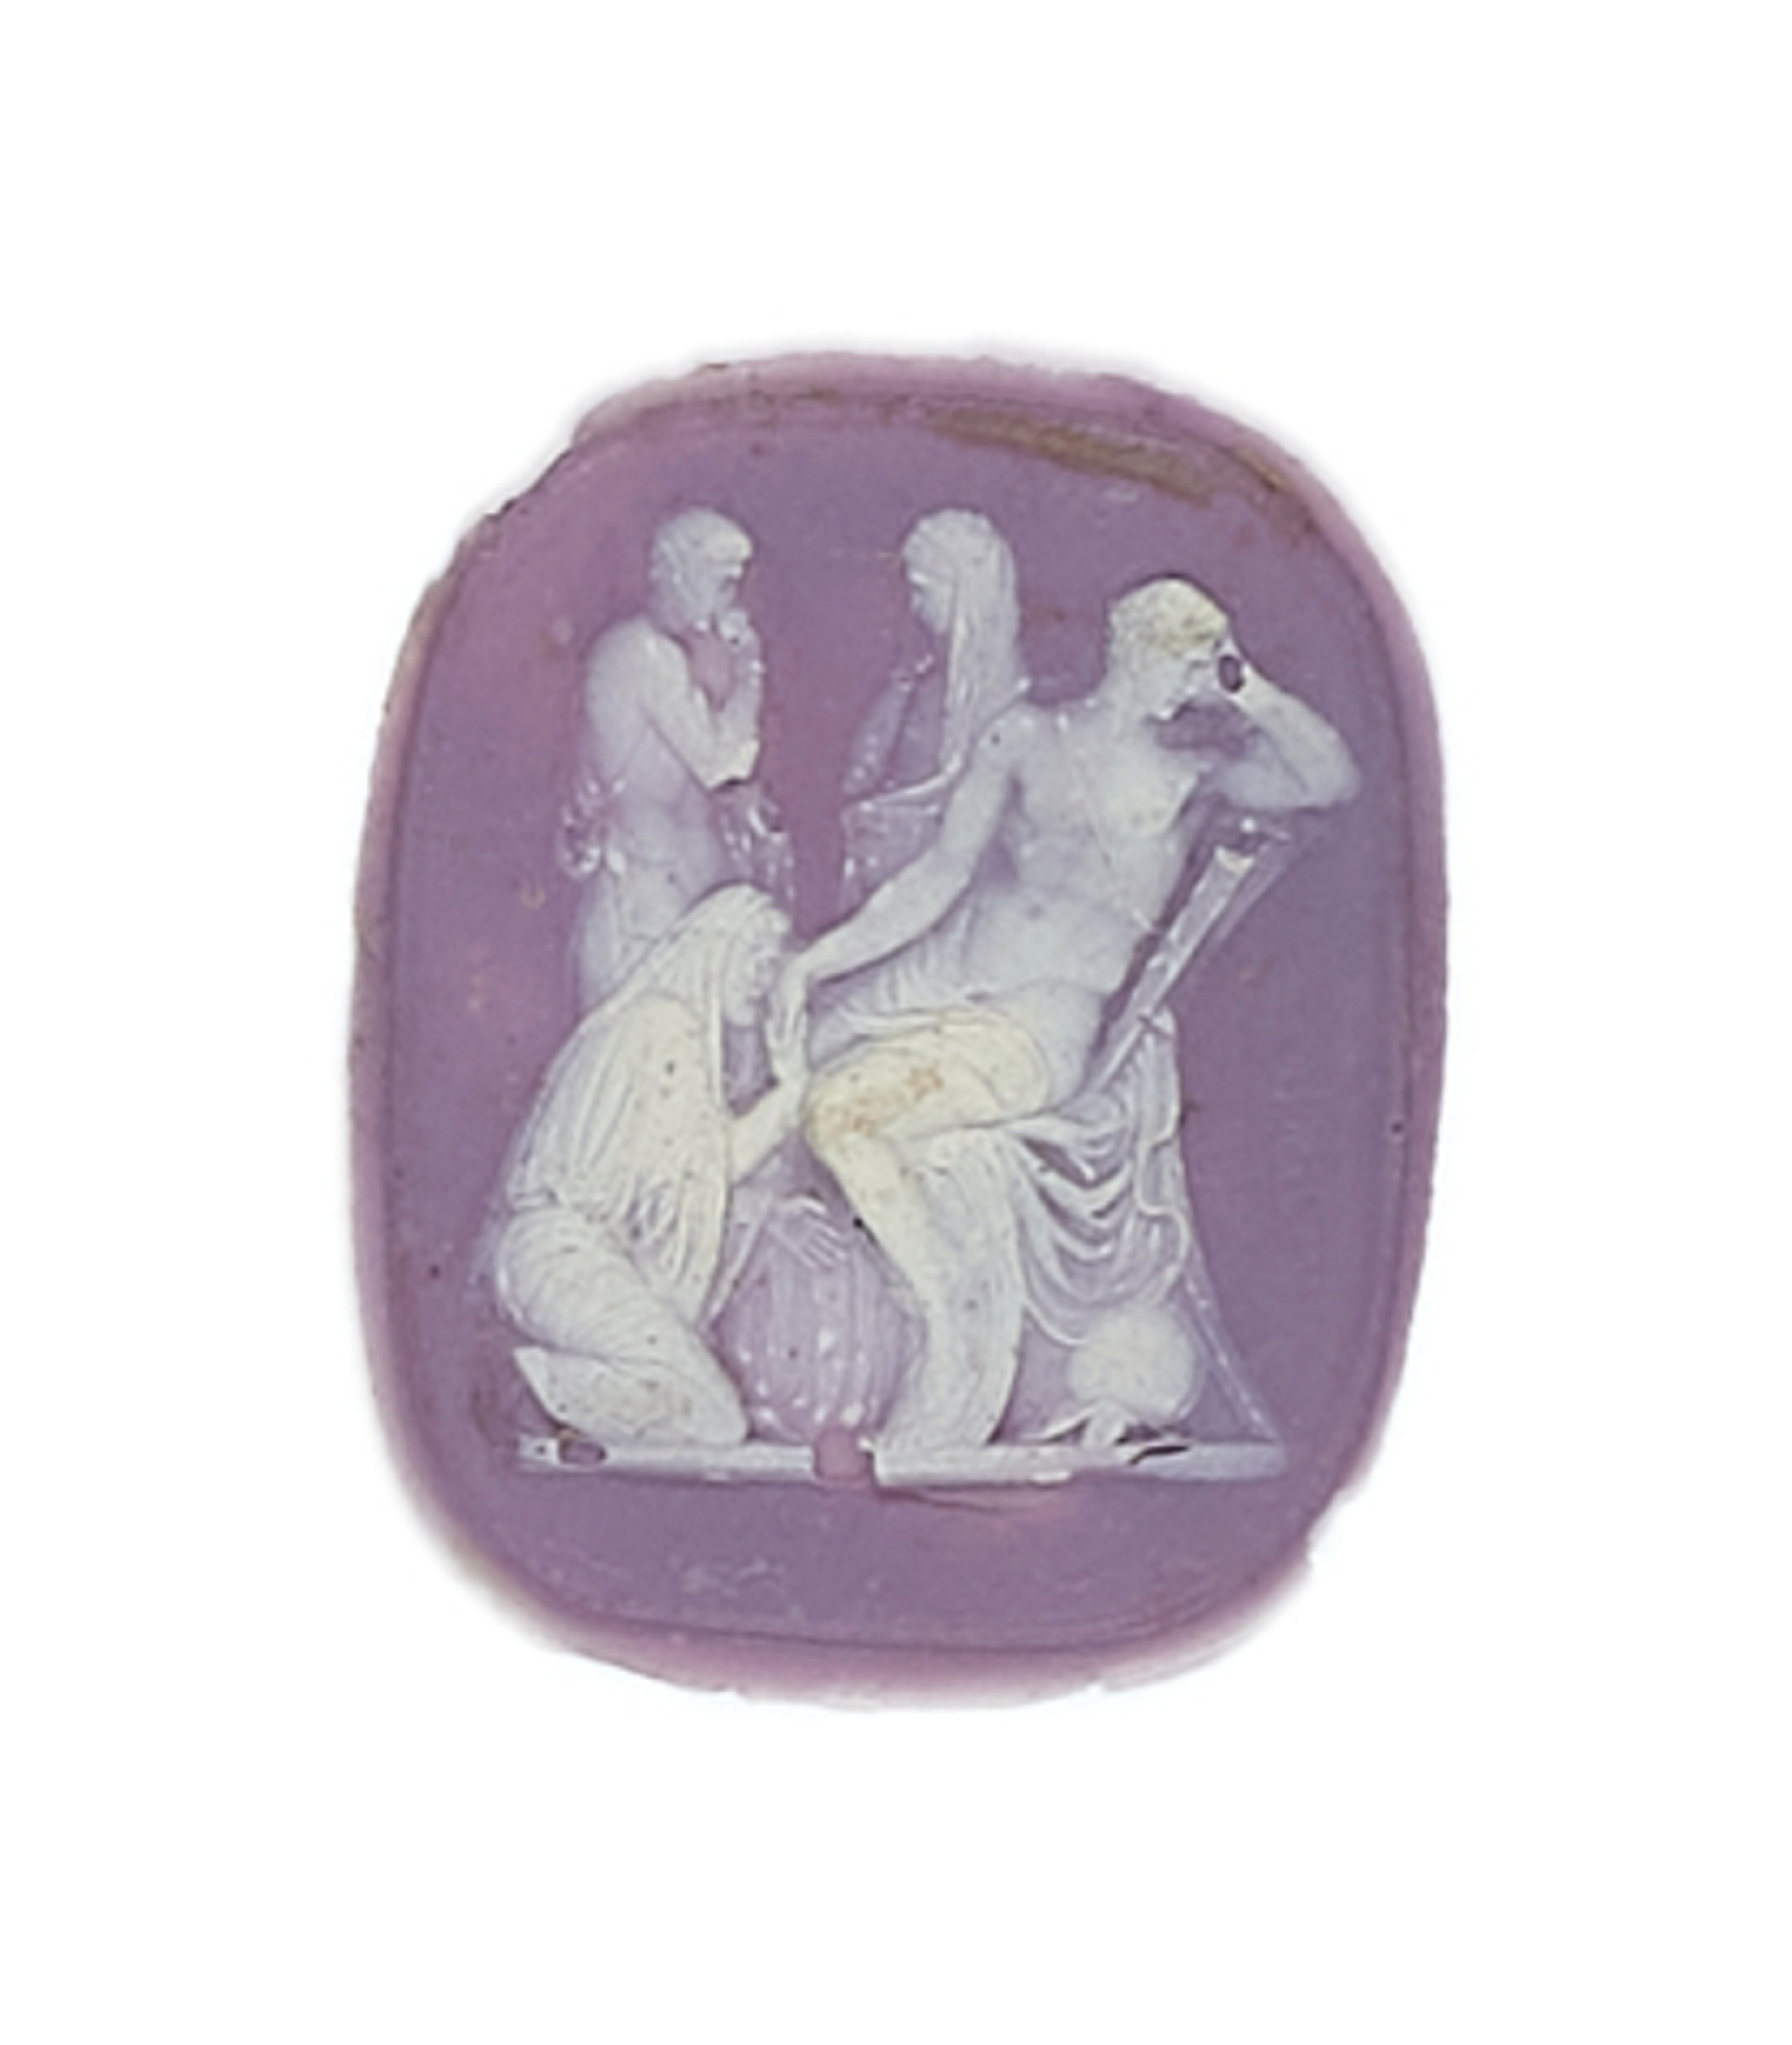 Impression of a classical figurative scene by Wedgwood